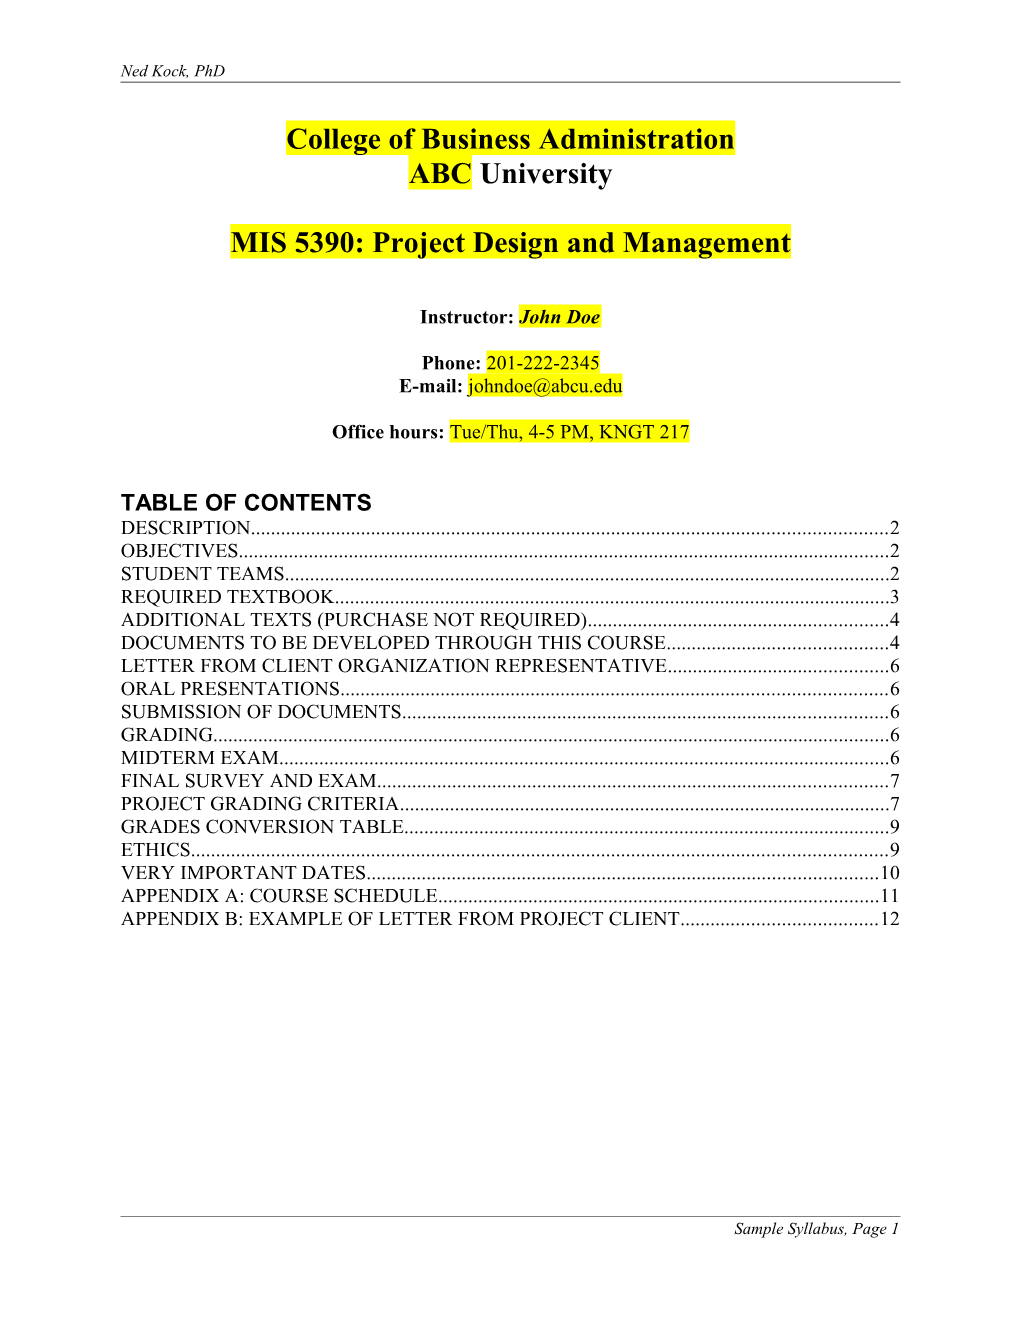 MIS 5390: Project Design and Management